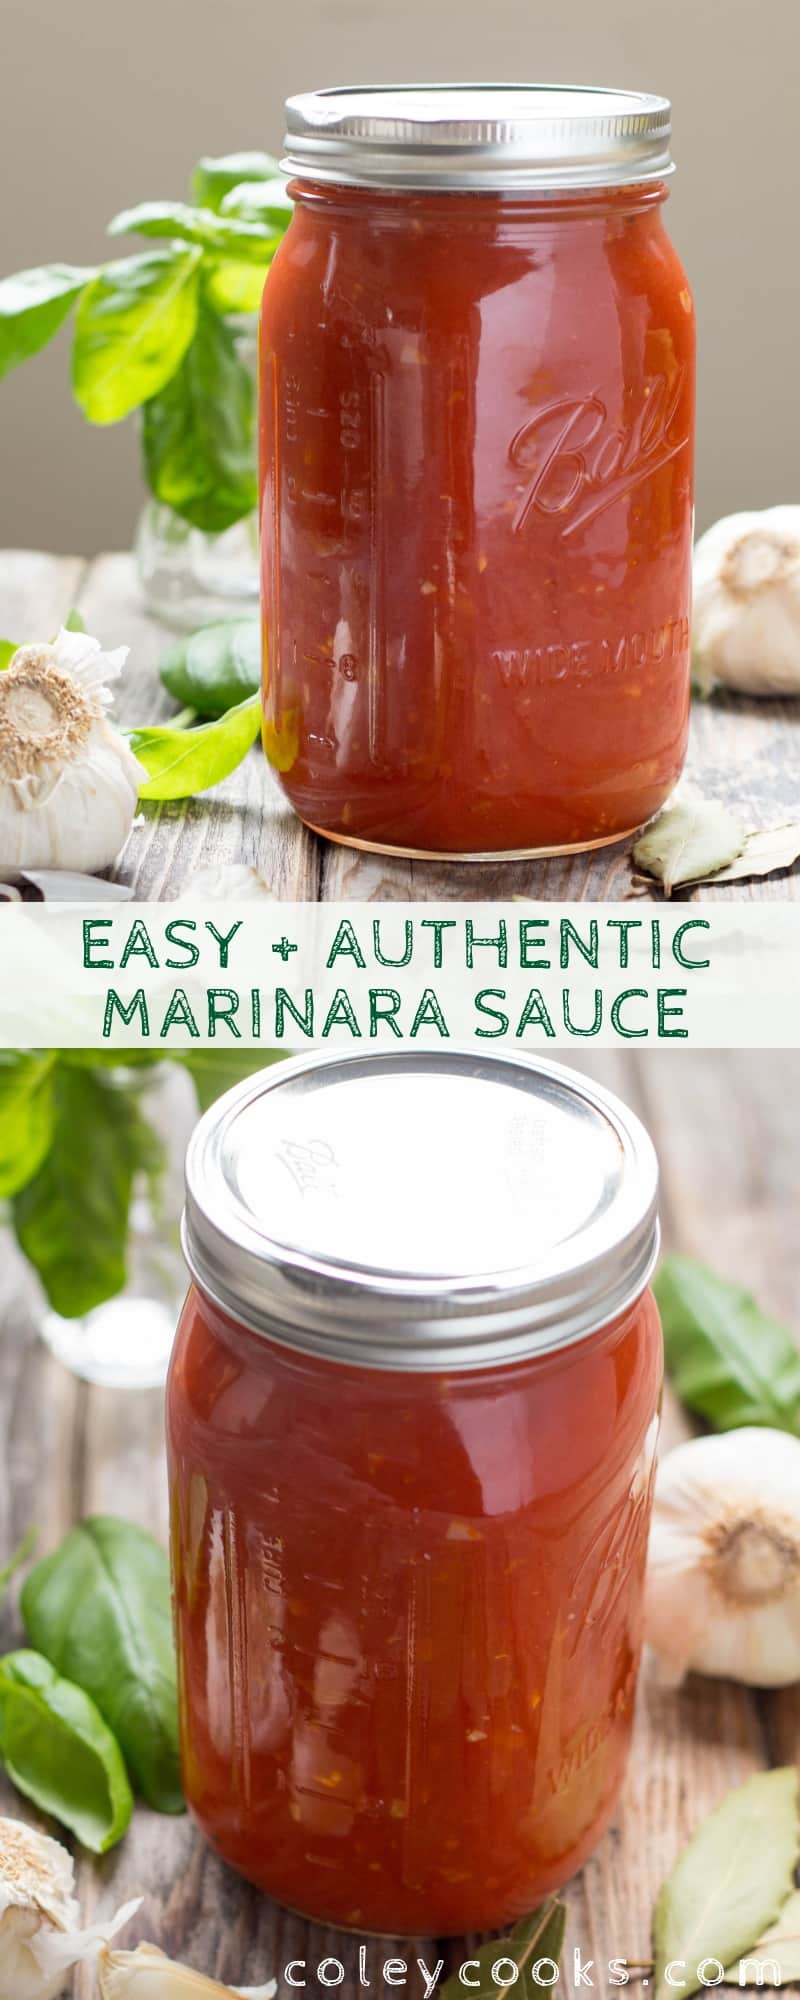 This easy + authentic Italian Marinara Sauce recipe is made from canned tomatoes and is a million times better than anything you can buy at the store! Takes less than 30 minutes to make and is perfect for tossing with pasta, topping pizza, chicken or eggplant parm, and more! #Italian #pasta #marinara #tomato #sauce #gravy #authentic | ColeyCooks.com